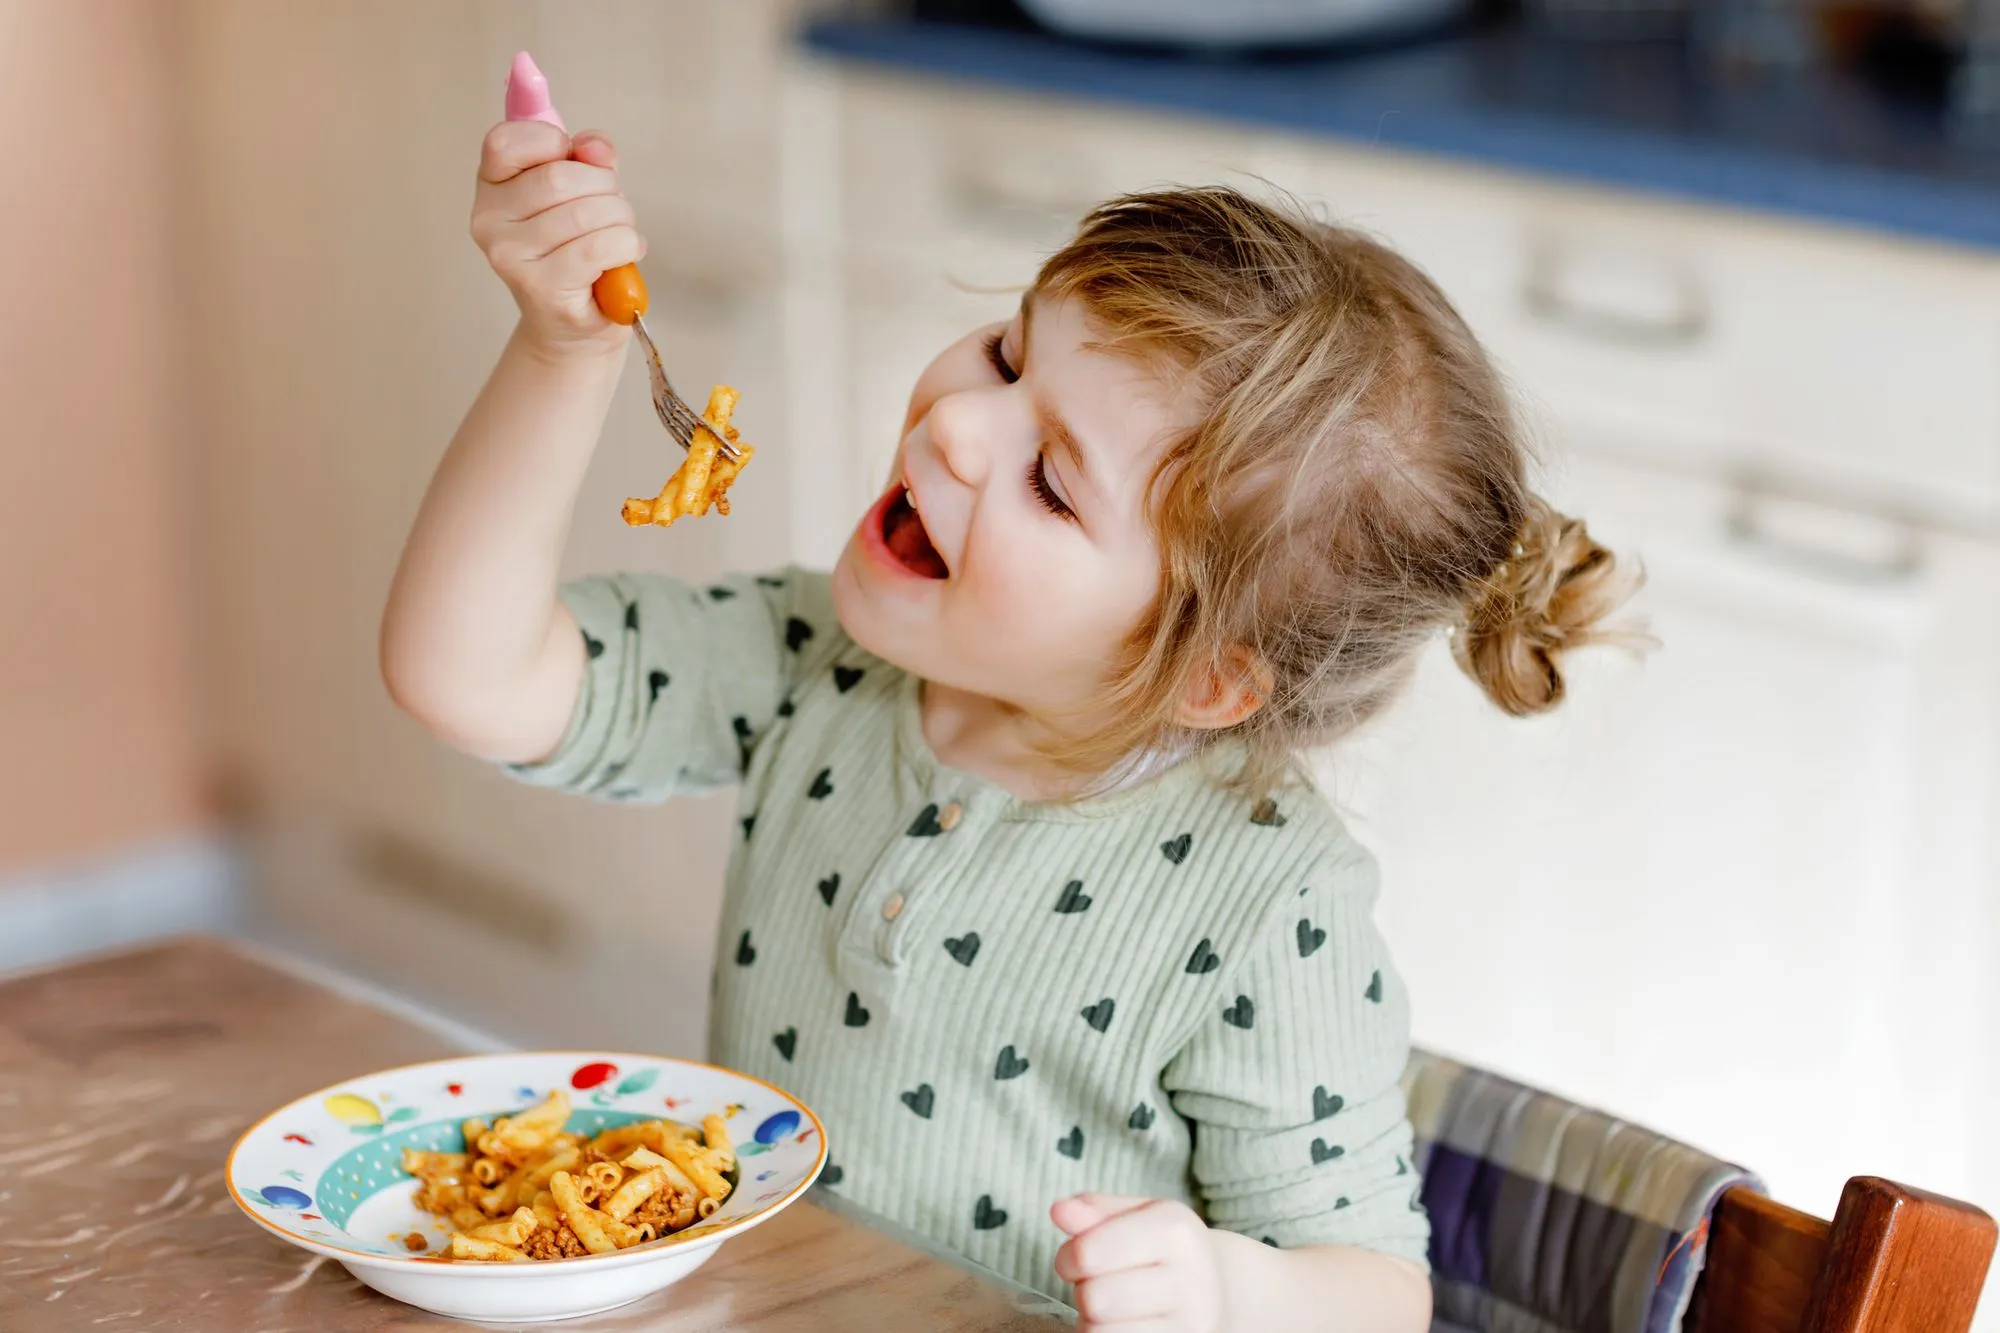 How Can I Successfully Manage Mealtime with My Toddler